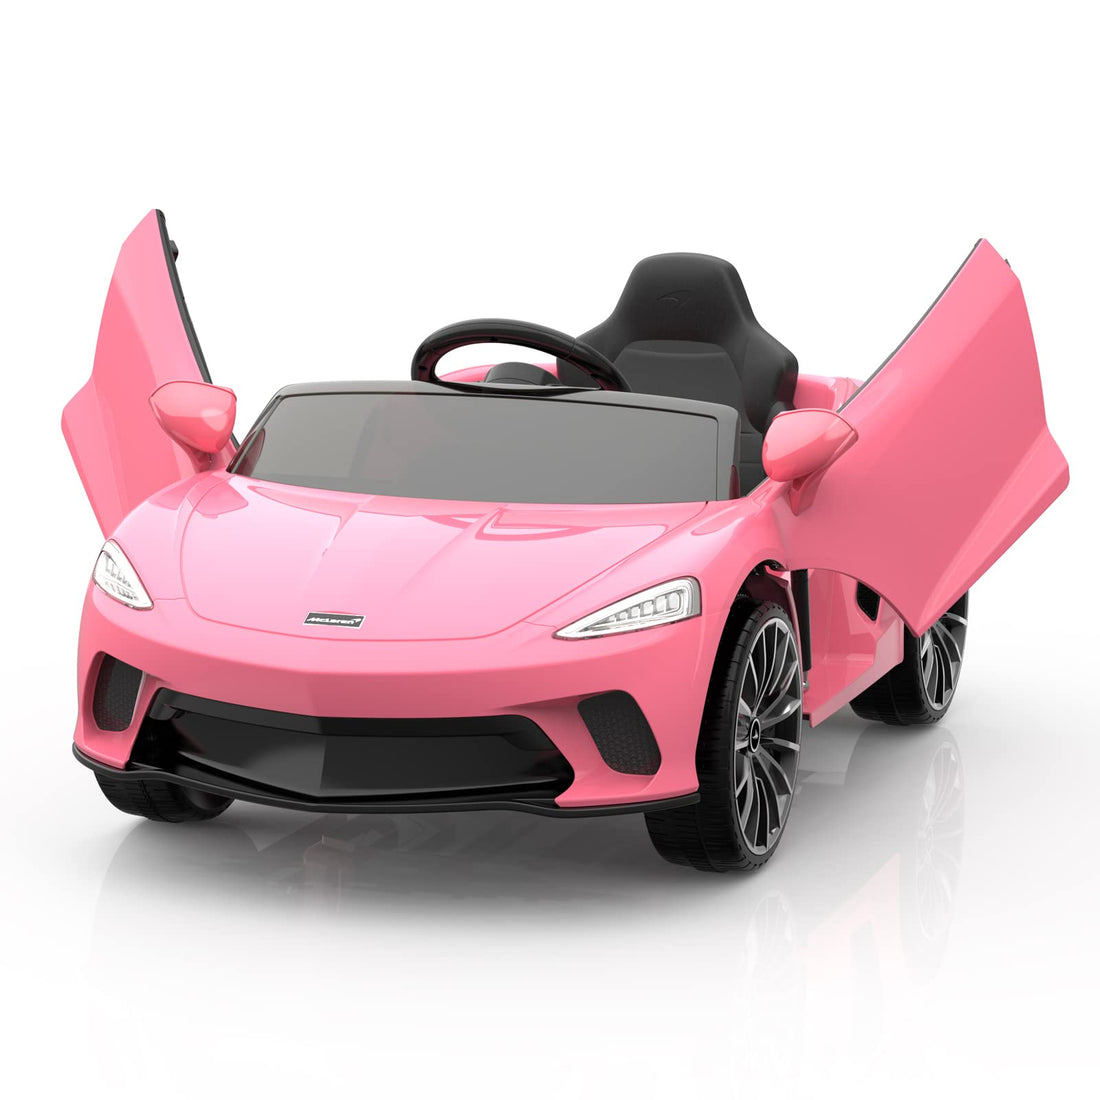 12V Kids Ride on Truck Car, Licensed Mclaren Battery Powered Electric Car with Remote Control, 3 Speeds, Bluetooth Music, Horn, LED Lights, 4-Wheel Ride on Toys